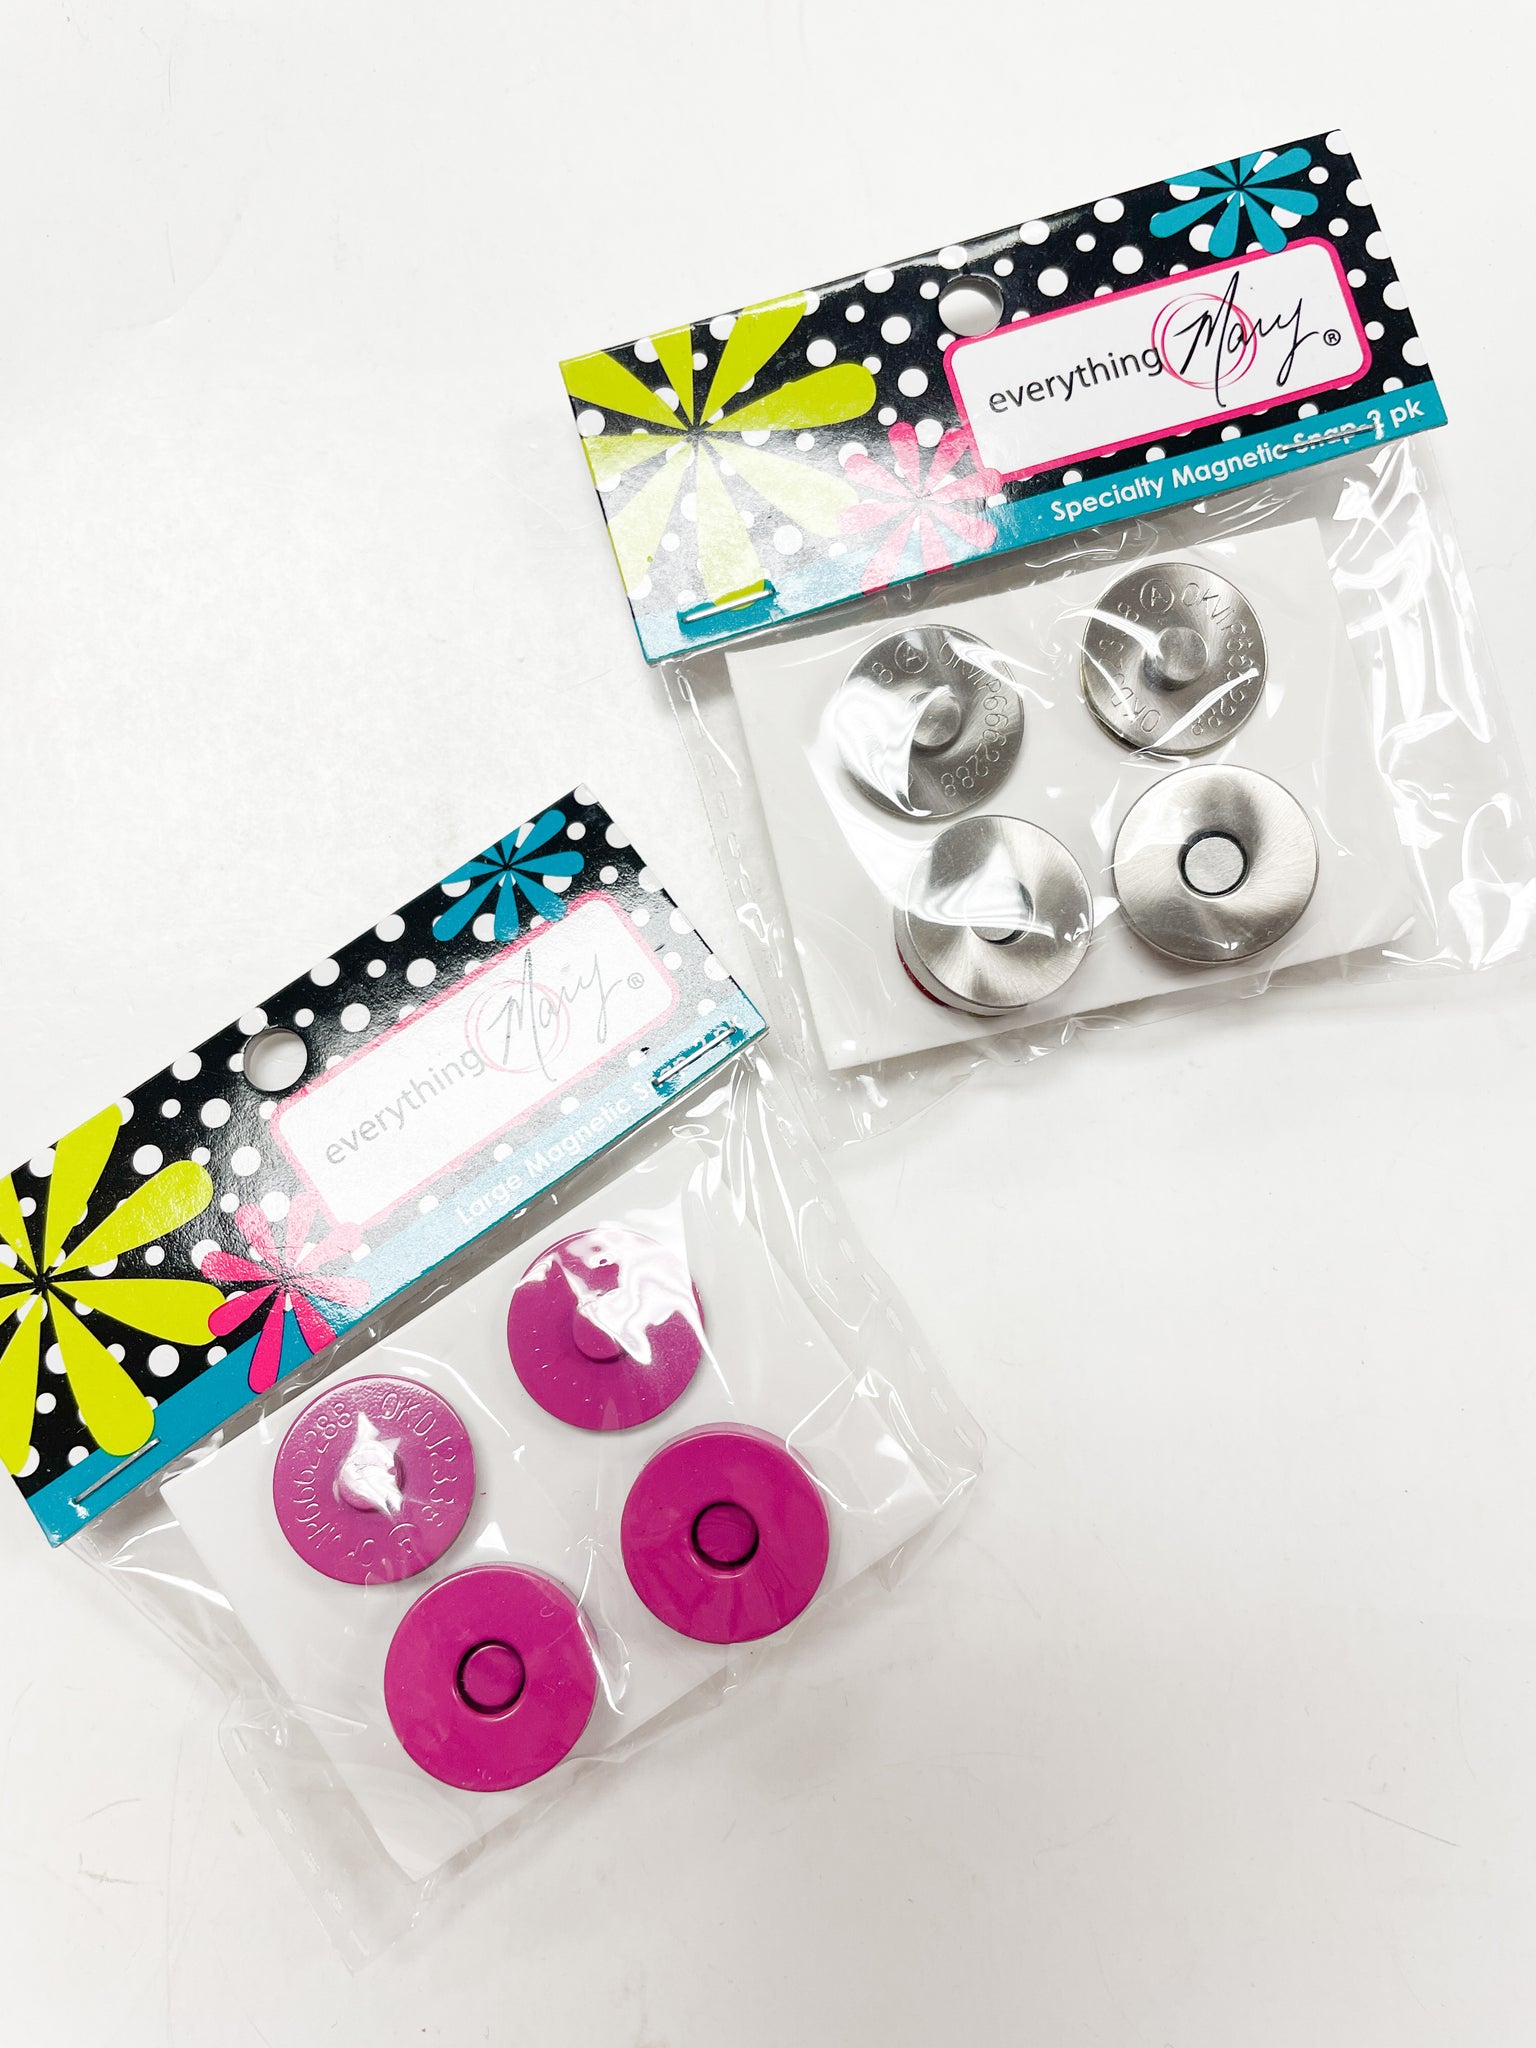 Magnetic Snap Closures Pack of 2 Sets - Brushed Silver or Hot Pink